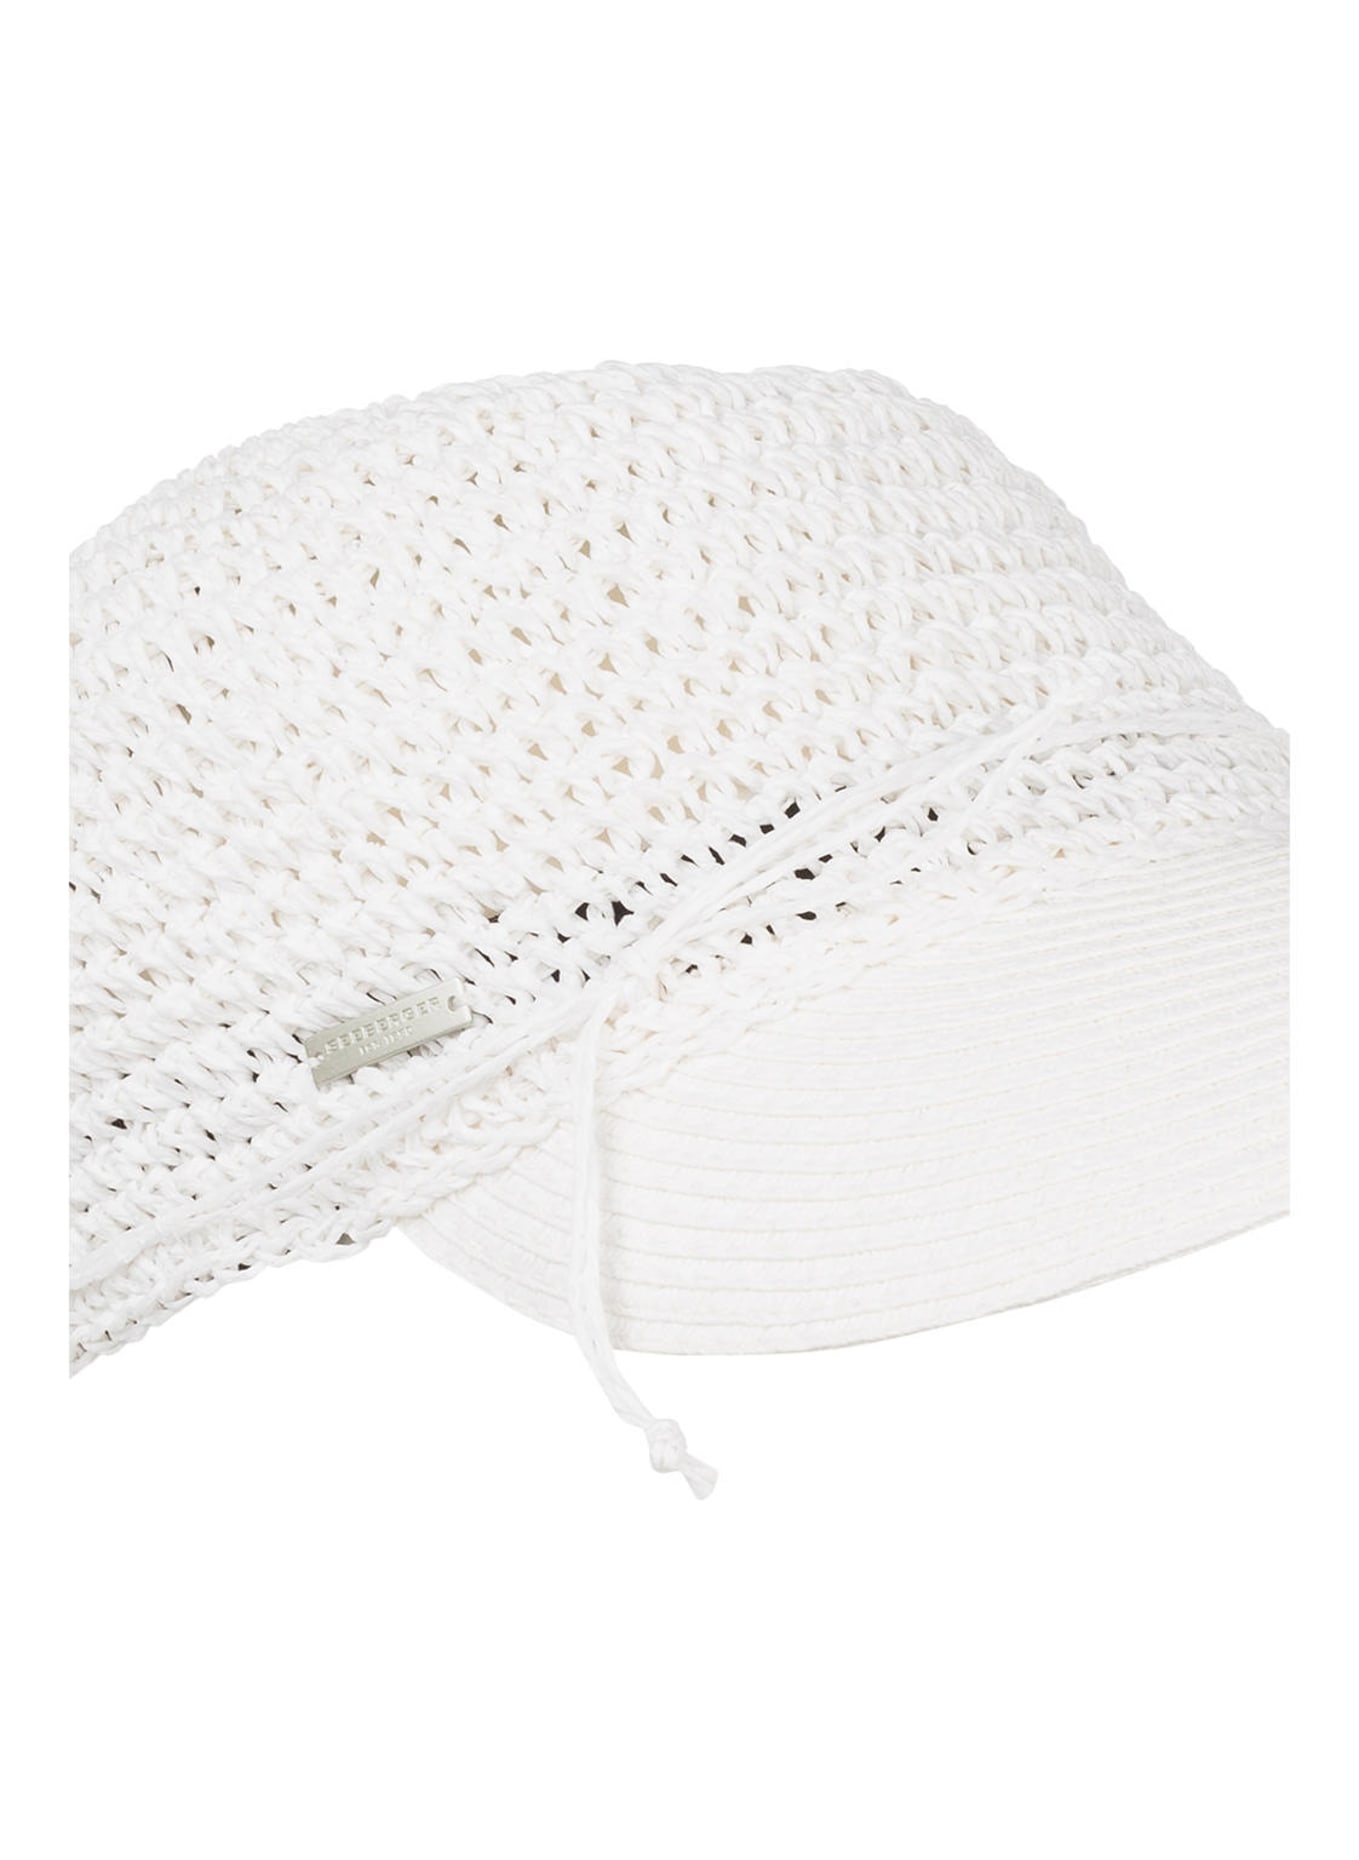 SEEBERGER Straw cap, Color: WHITE (Image 4)